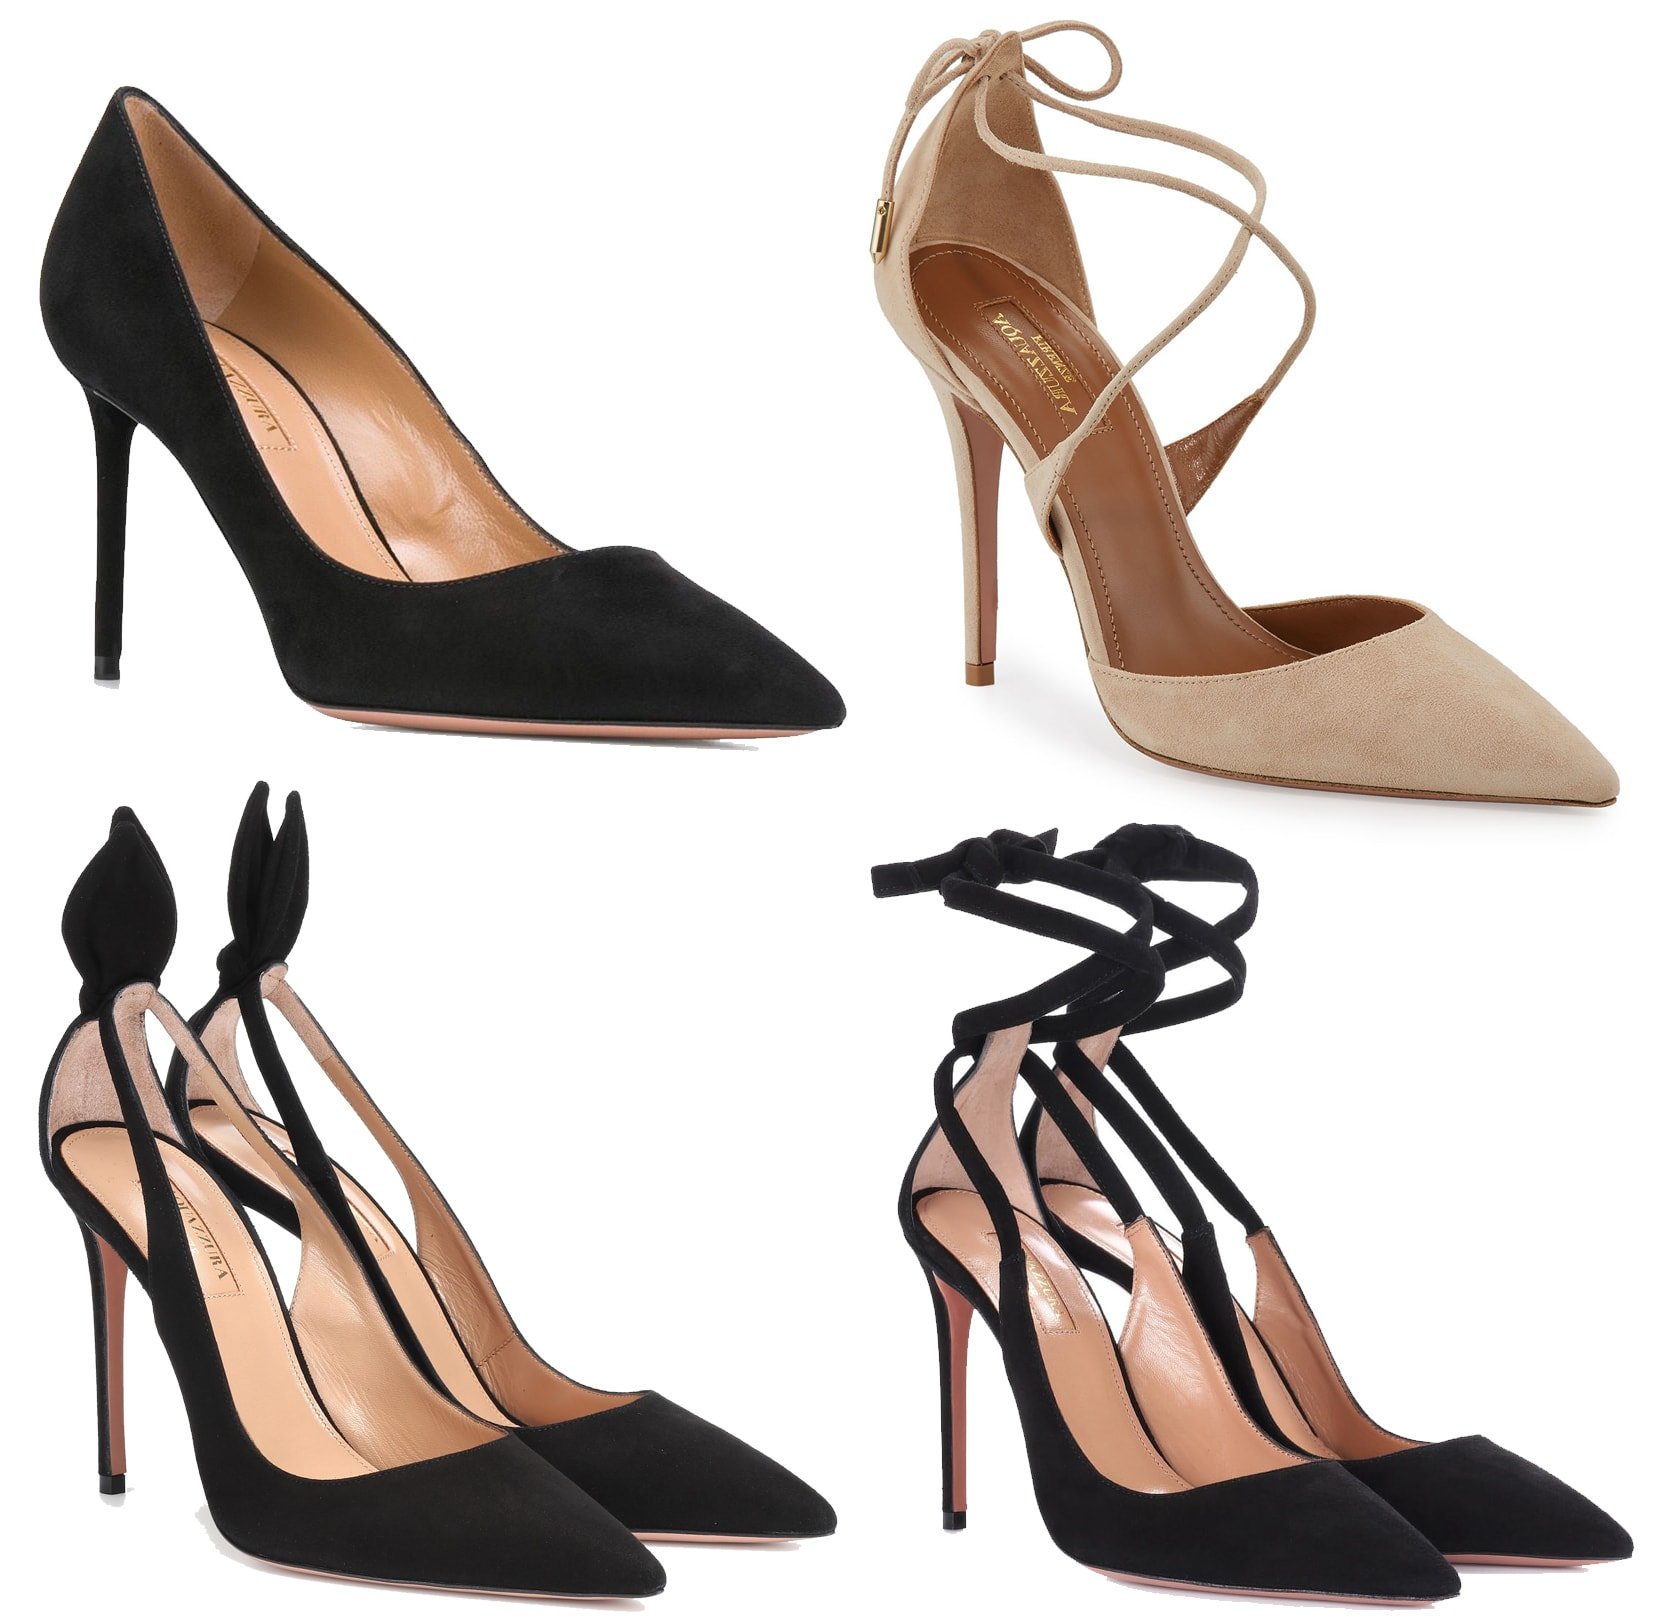 The Aquazzura Purist, Matilde, Deneuve, and Milano are just some of the styles seen on Meghan Markle, Duchess of Sussex